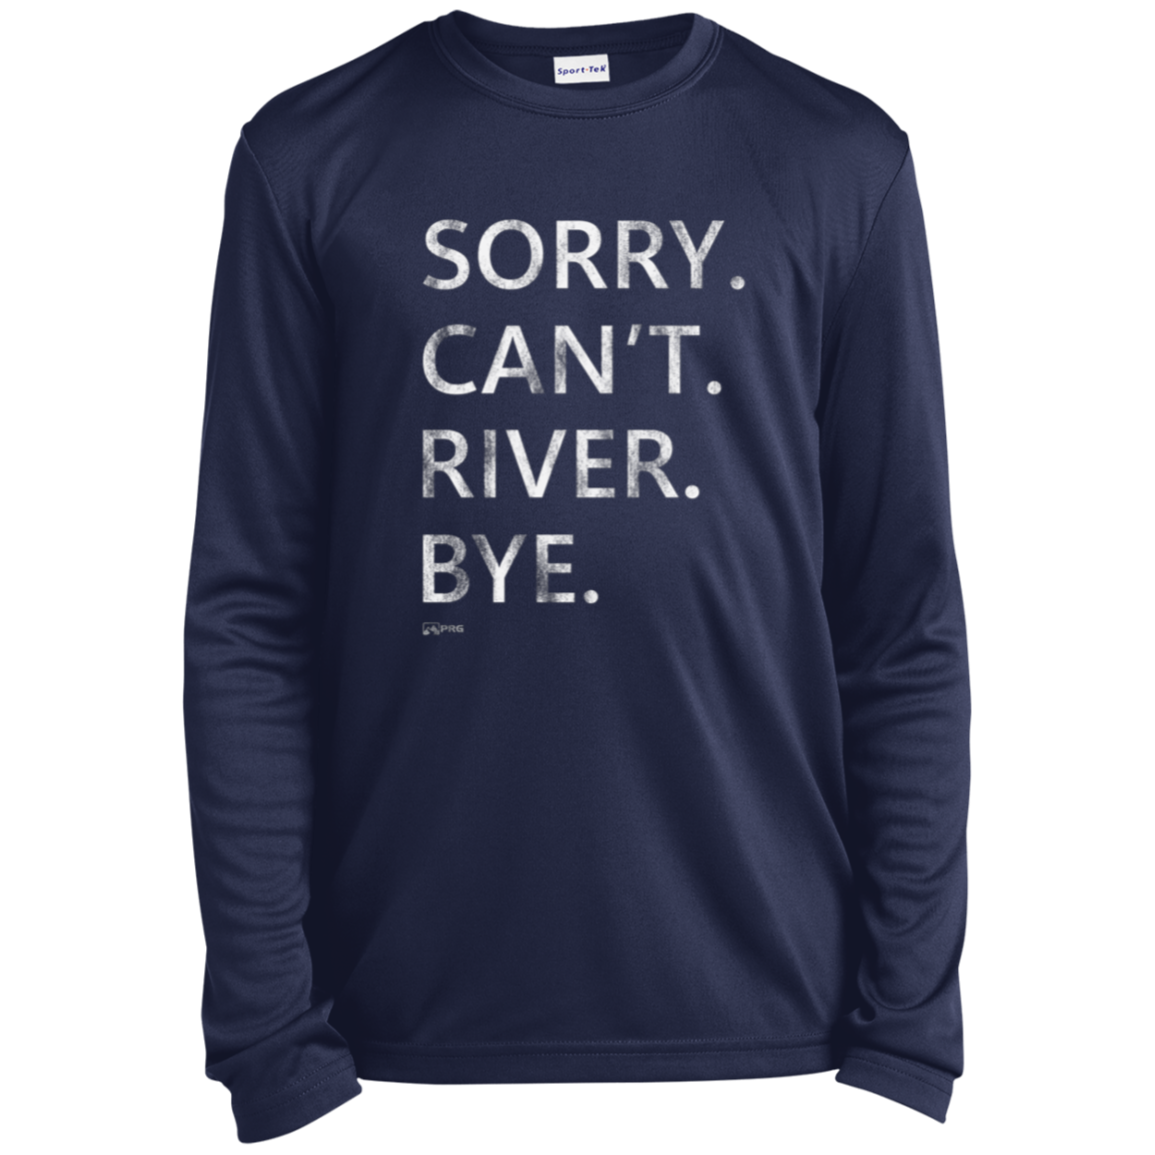 Sorry. Can't. River. Bye. - Youth Long Sleeve